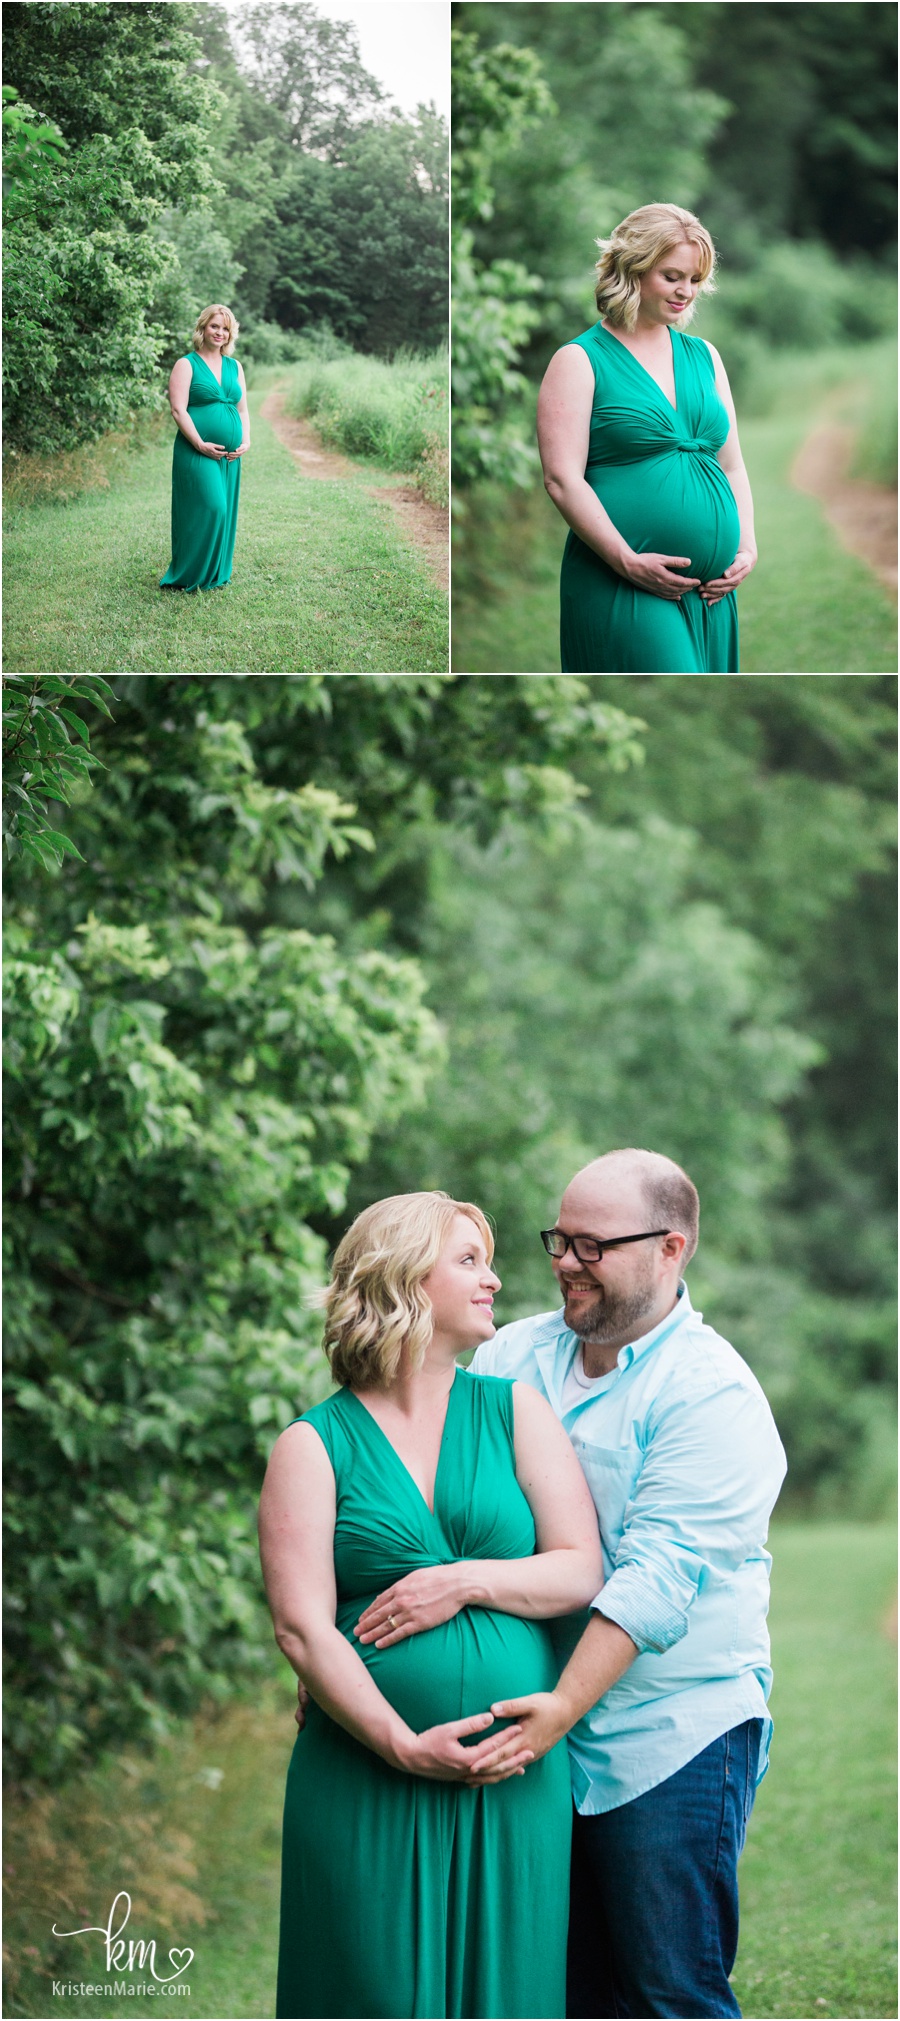 Maternity Photographer in Indianapolis, Indiana